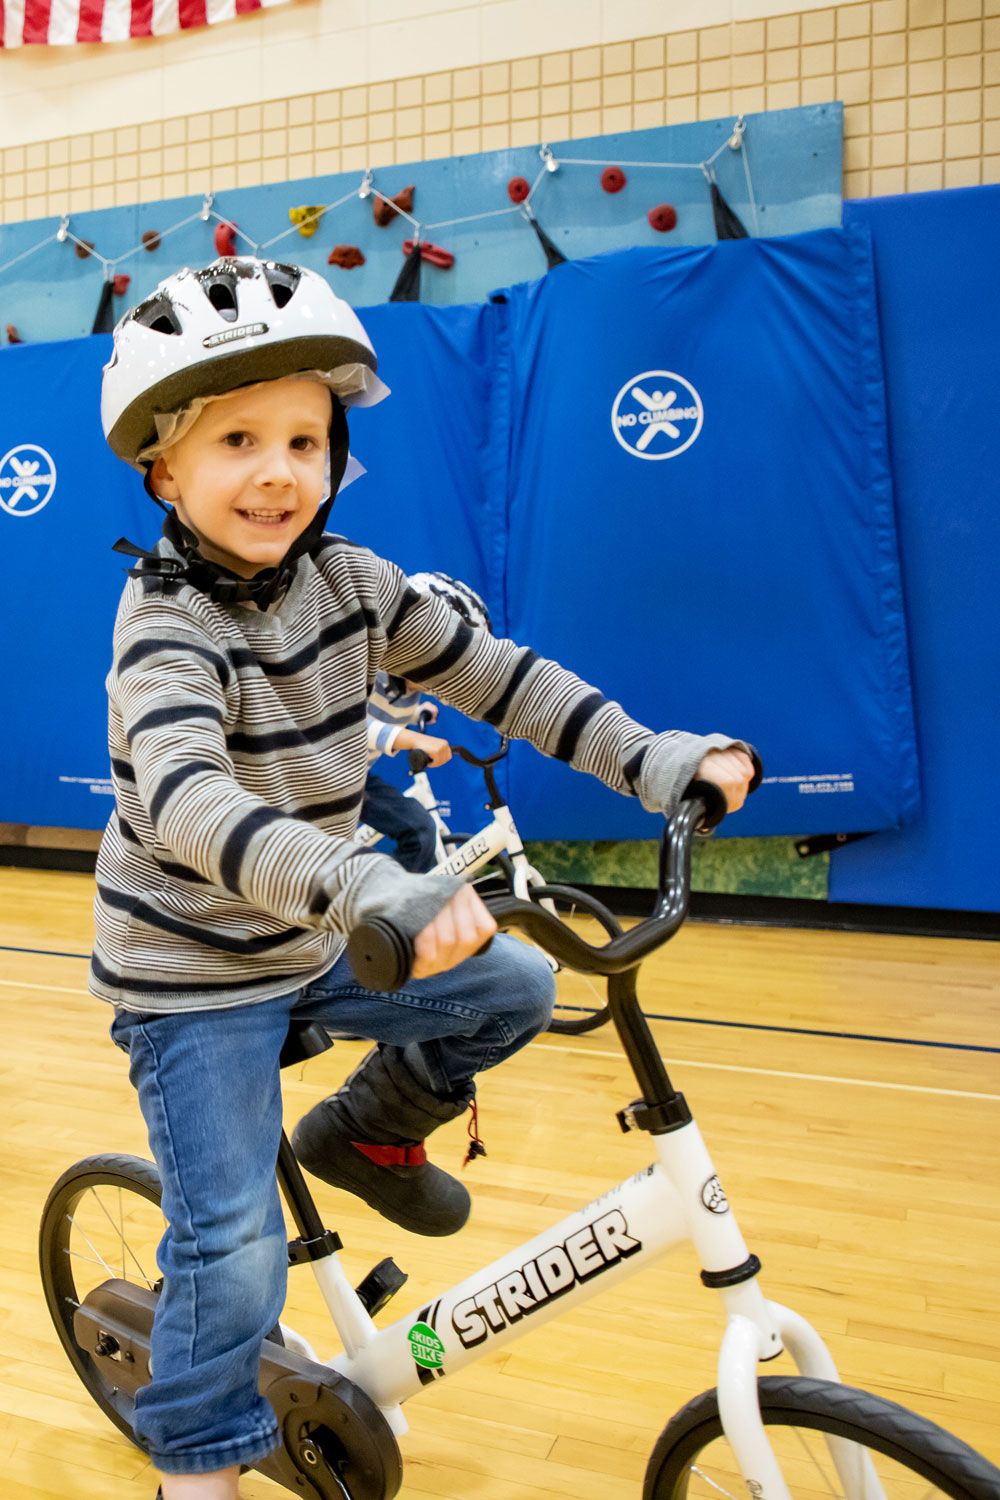 A boy smiles on a white Strider bike during the All Kids Bike curriculum